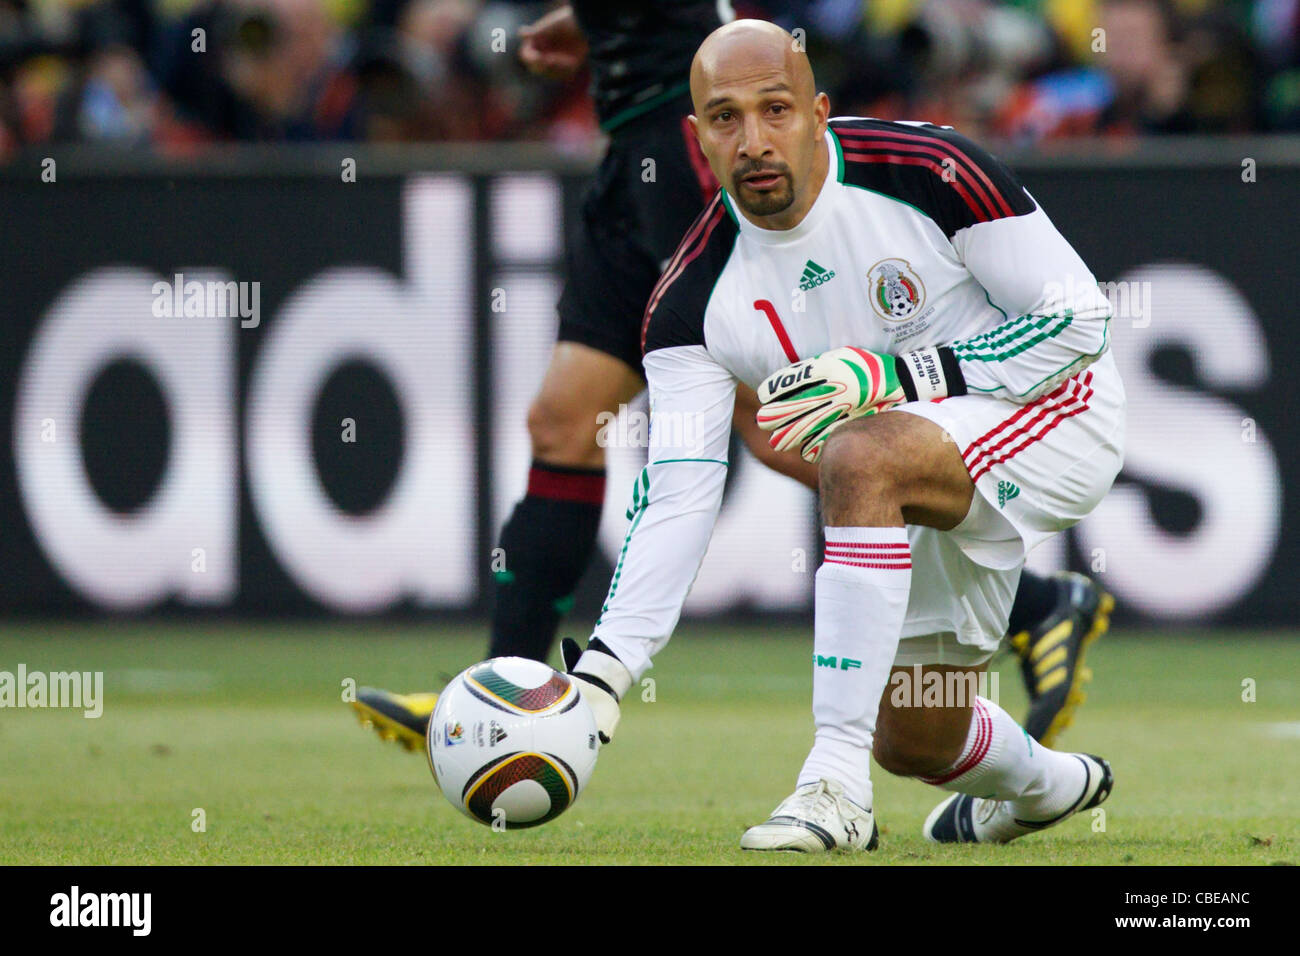 Mexico goalkeeper Oscar Perez rolls the ball during the opening match of the 2010 FIFA World Cup against South Africa. Stock Photo